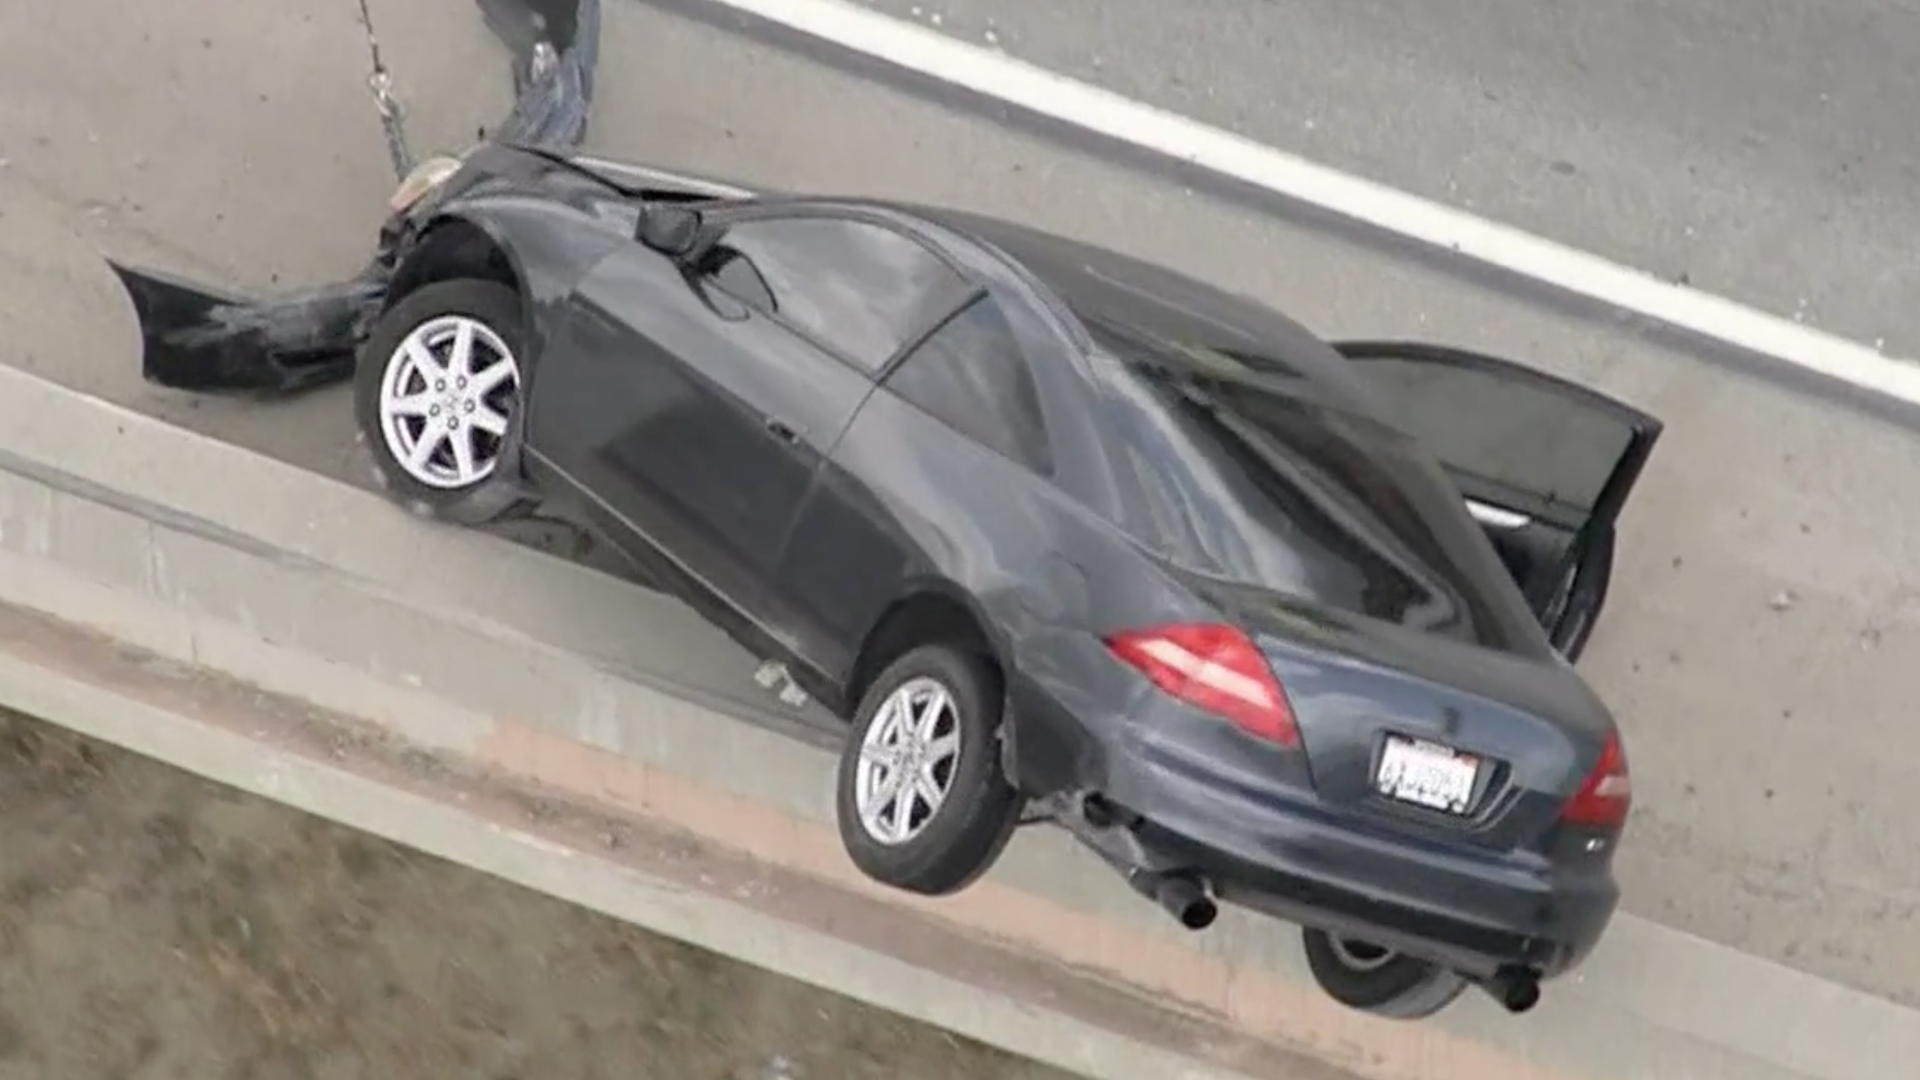 Watch a Crashed Honda Accord Coupe Dangle Off an Overpass